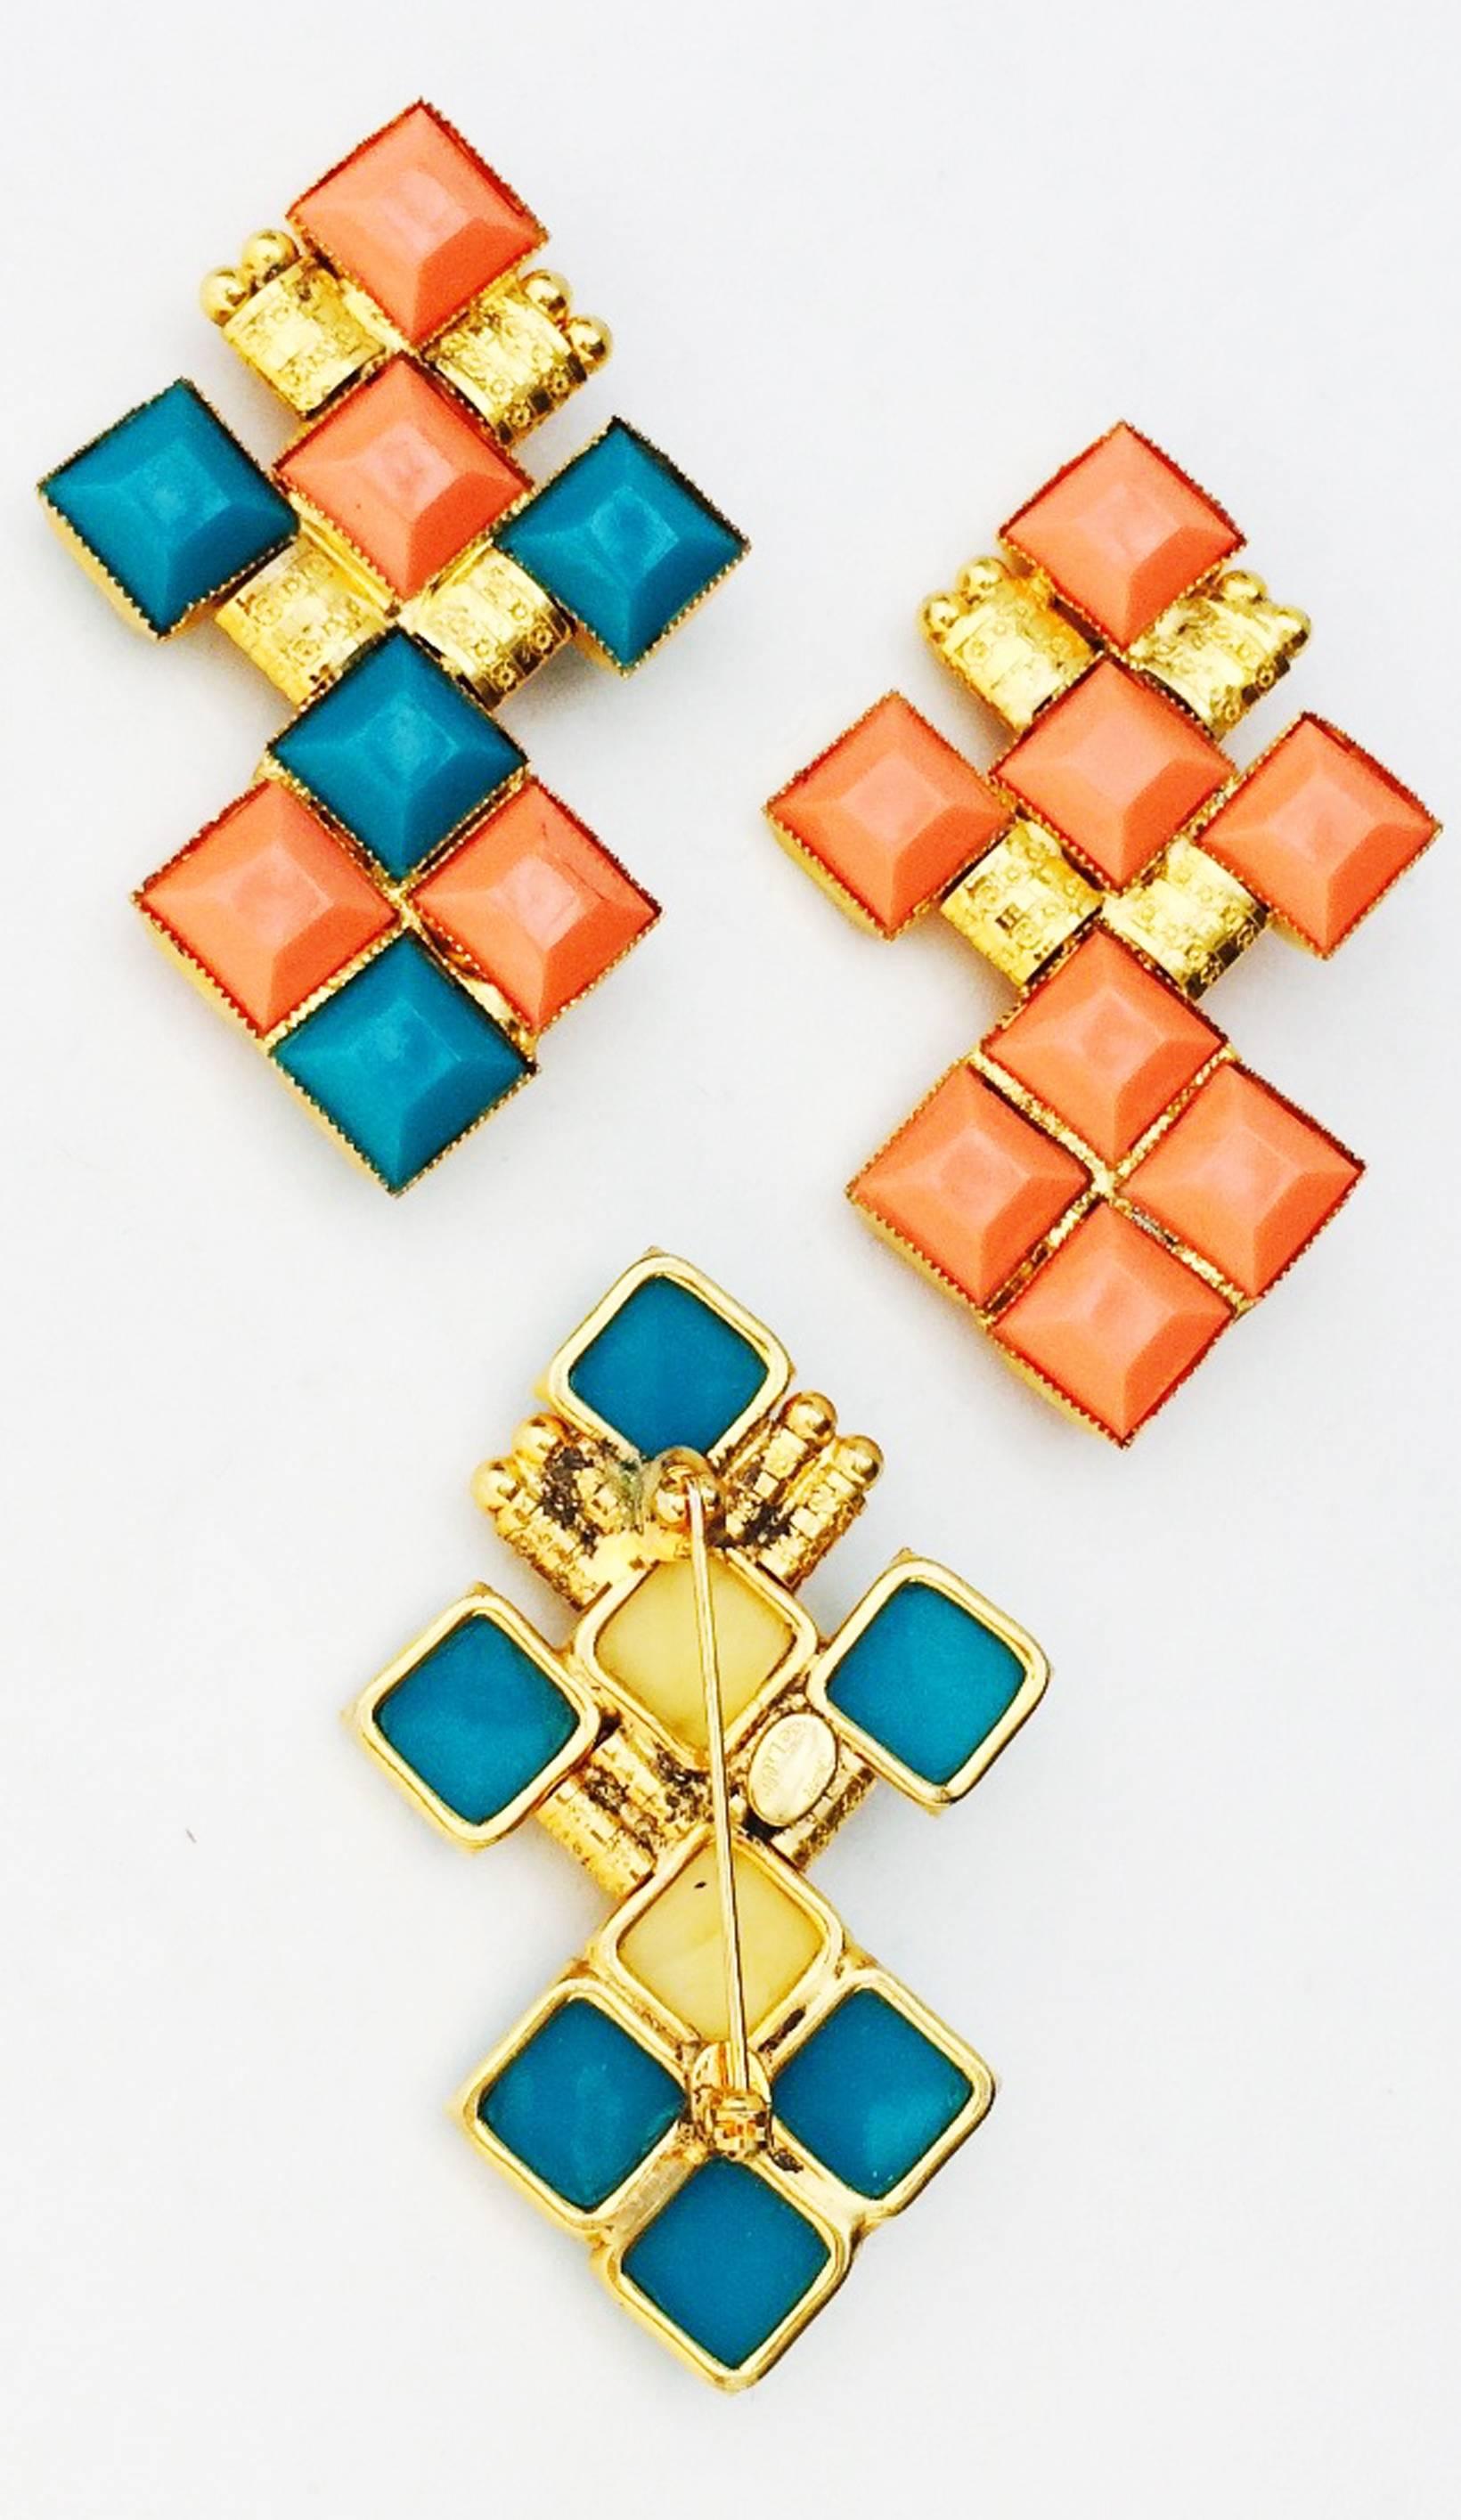 A fine and rare vintage William de Lillo for Nina Ricci brooch trio. Three matching signed gilt metal items produced For Nina Ricci haute couture and feature various colored plastic 